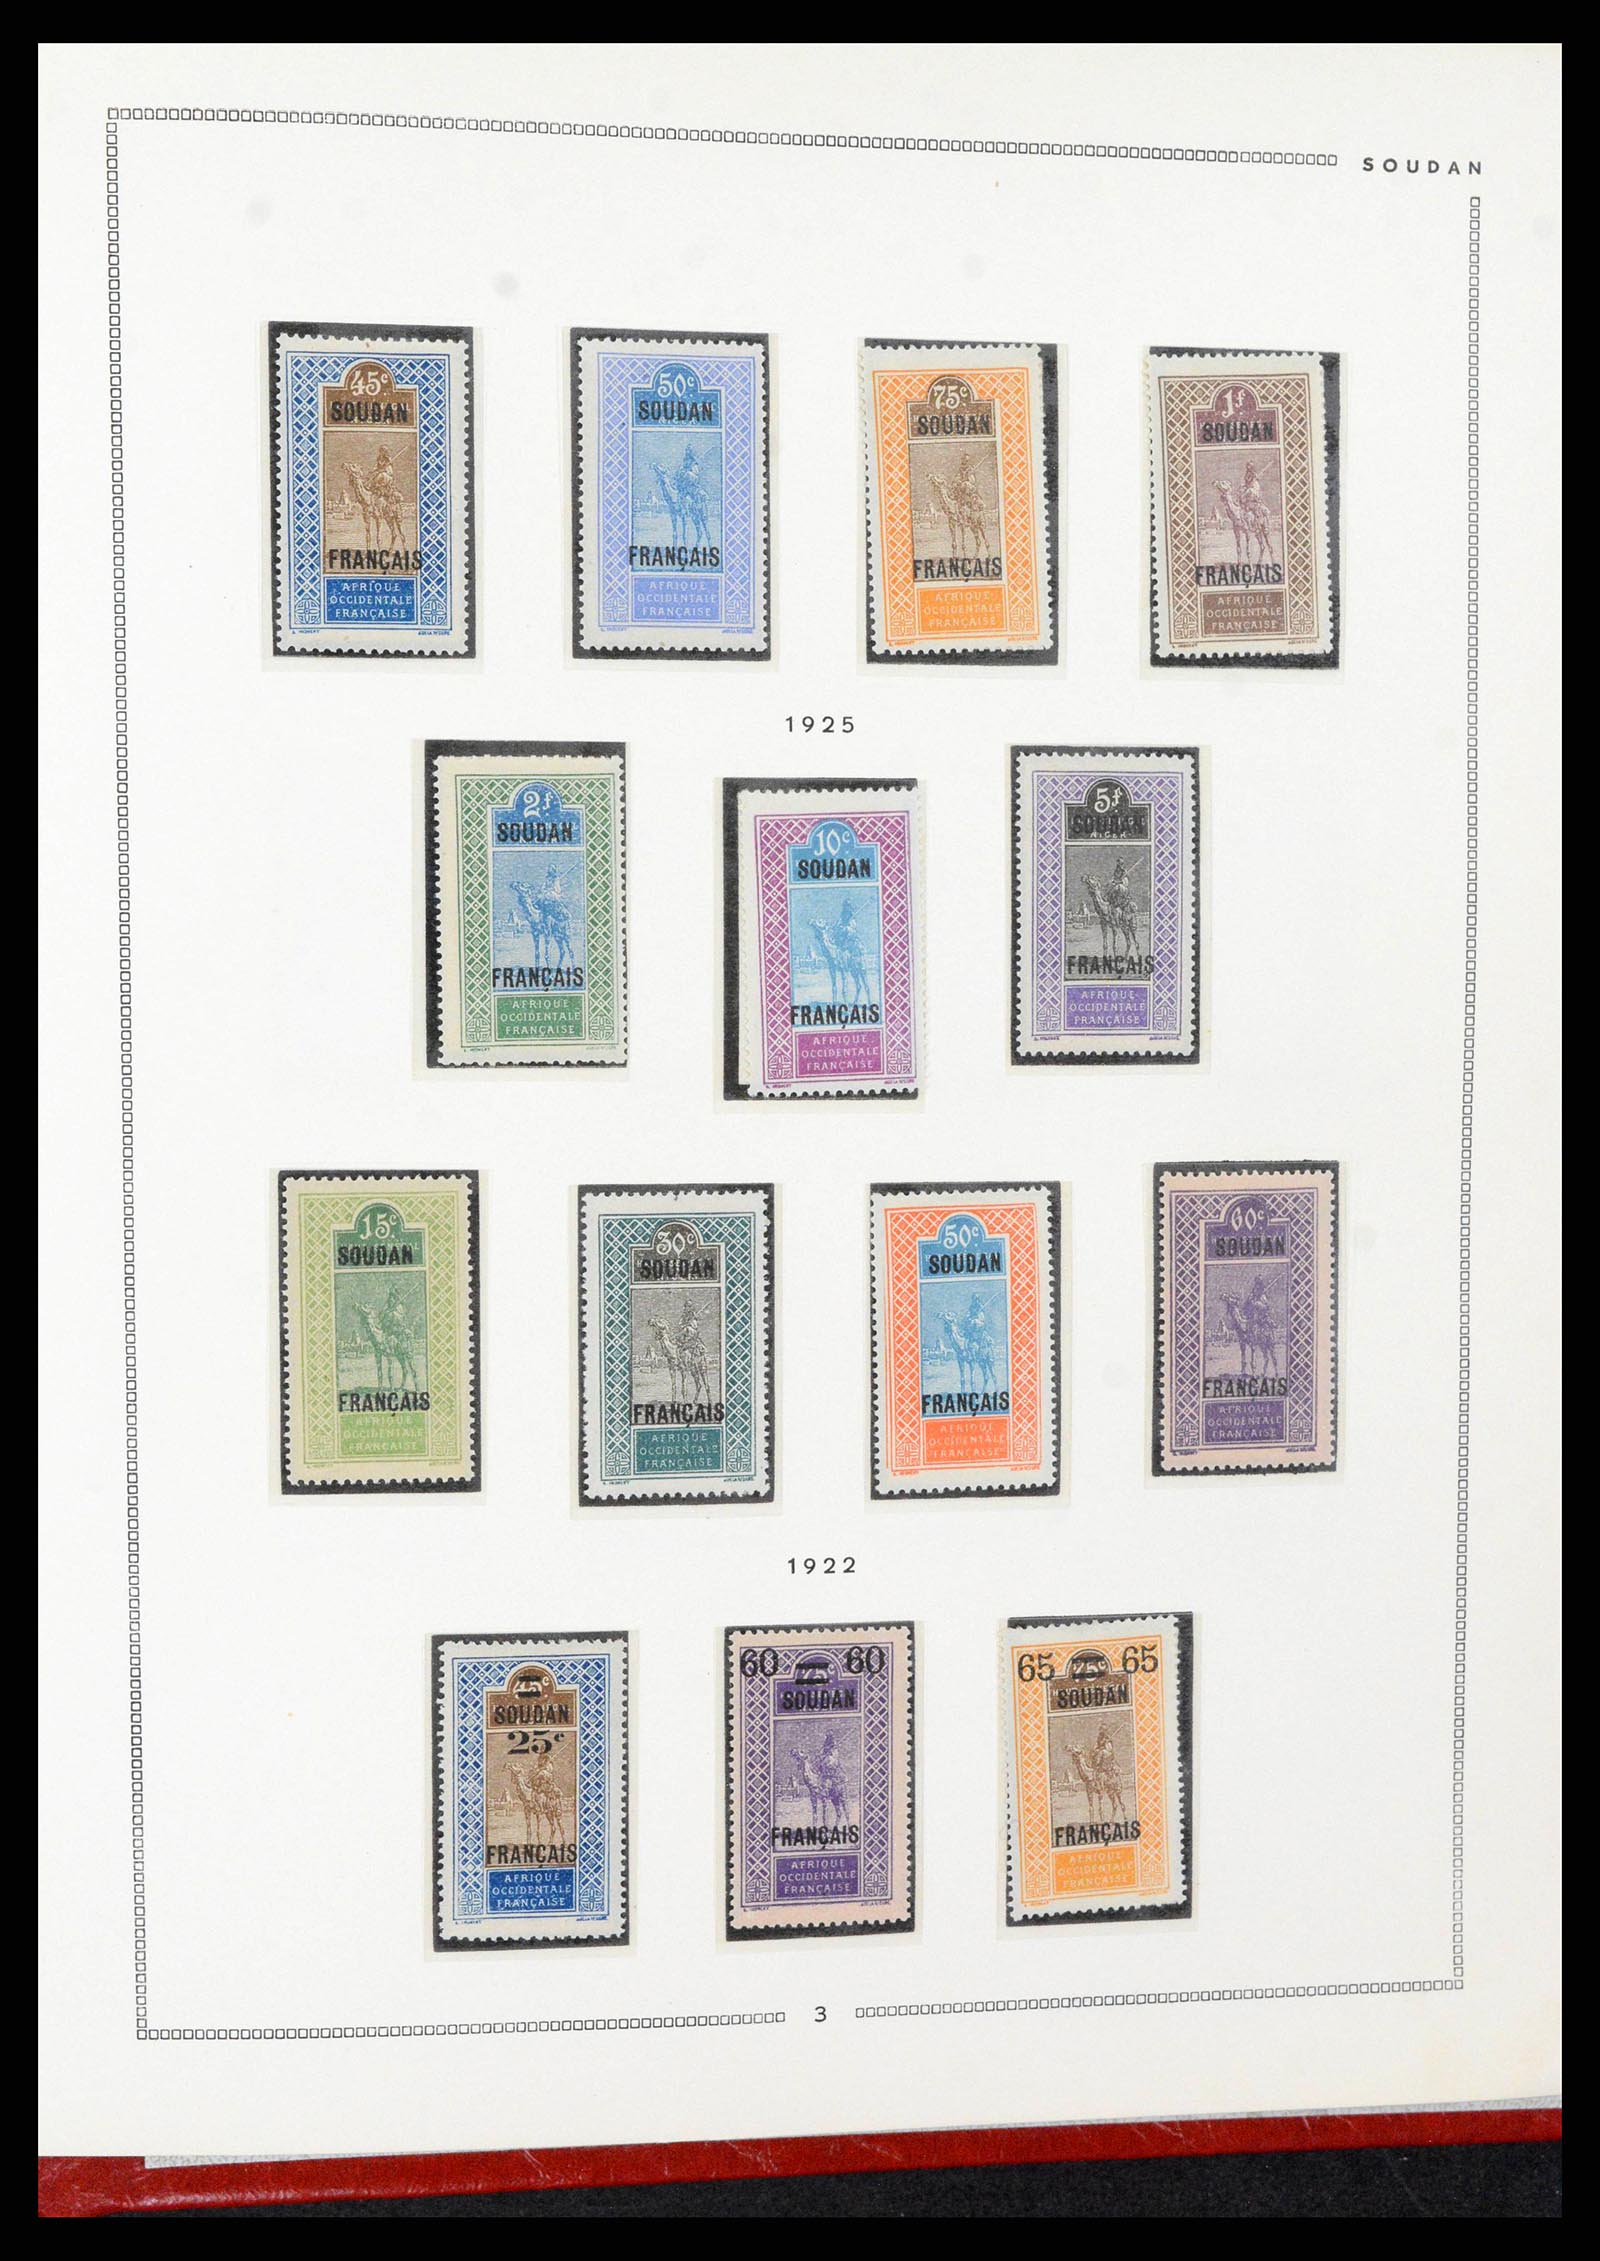 38385 0090 - Stamp collection 38385 French Colonies supercollection 1859-1975.